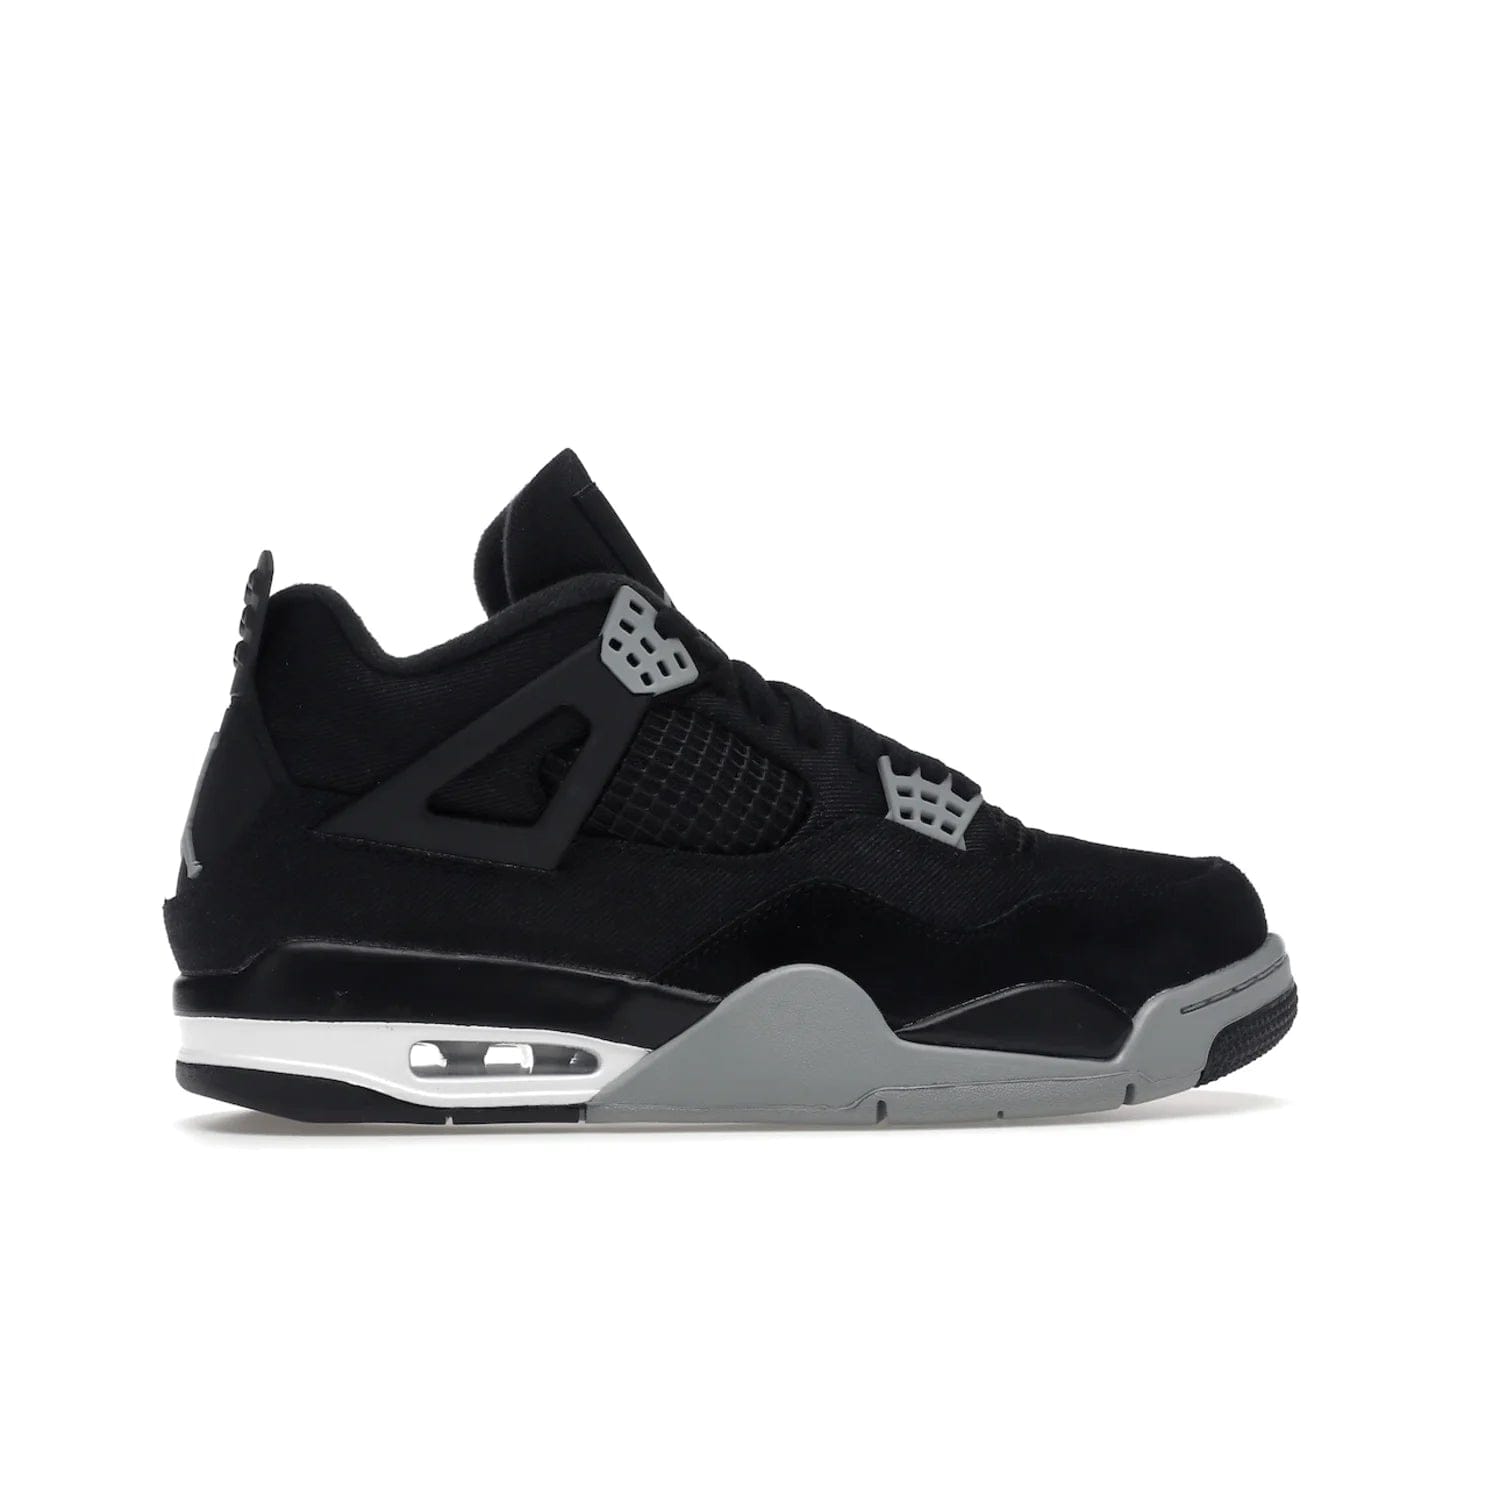 Jordan 4 Retro SE Black Canvas - Image 36 - Only at www.BallersClubKickz.com - The Air Jordan 4 Retro SE Black Canvas brings timeless style and modern luxury. Classic mid-top sneaker in black canvas and grey suede with tonal Jumpman logo, Flight logo and polyurethane midsole with visible Air-sole cushioning. Refresh your sneaker collection and rock the Air Jordan 4 Retro SE Black Canvas.